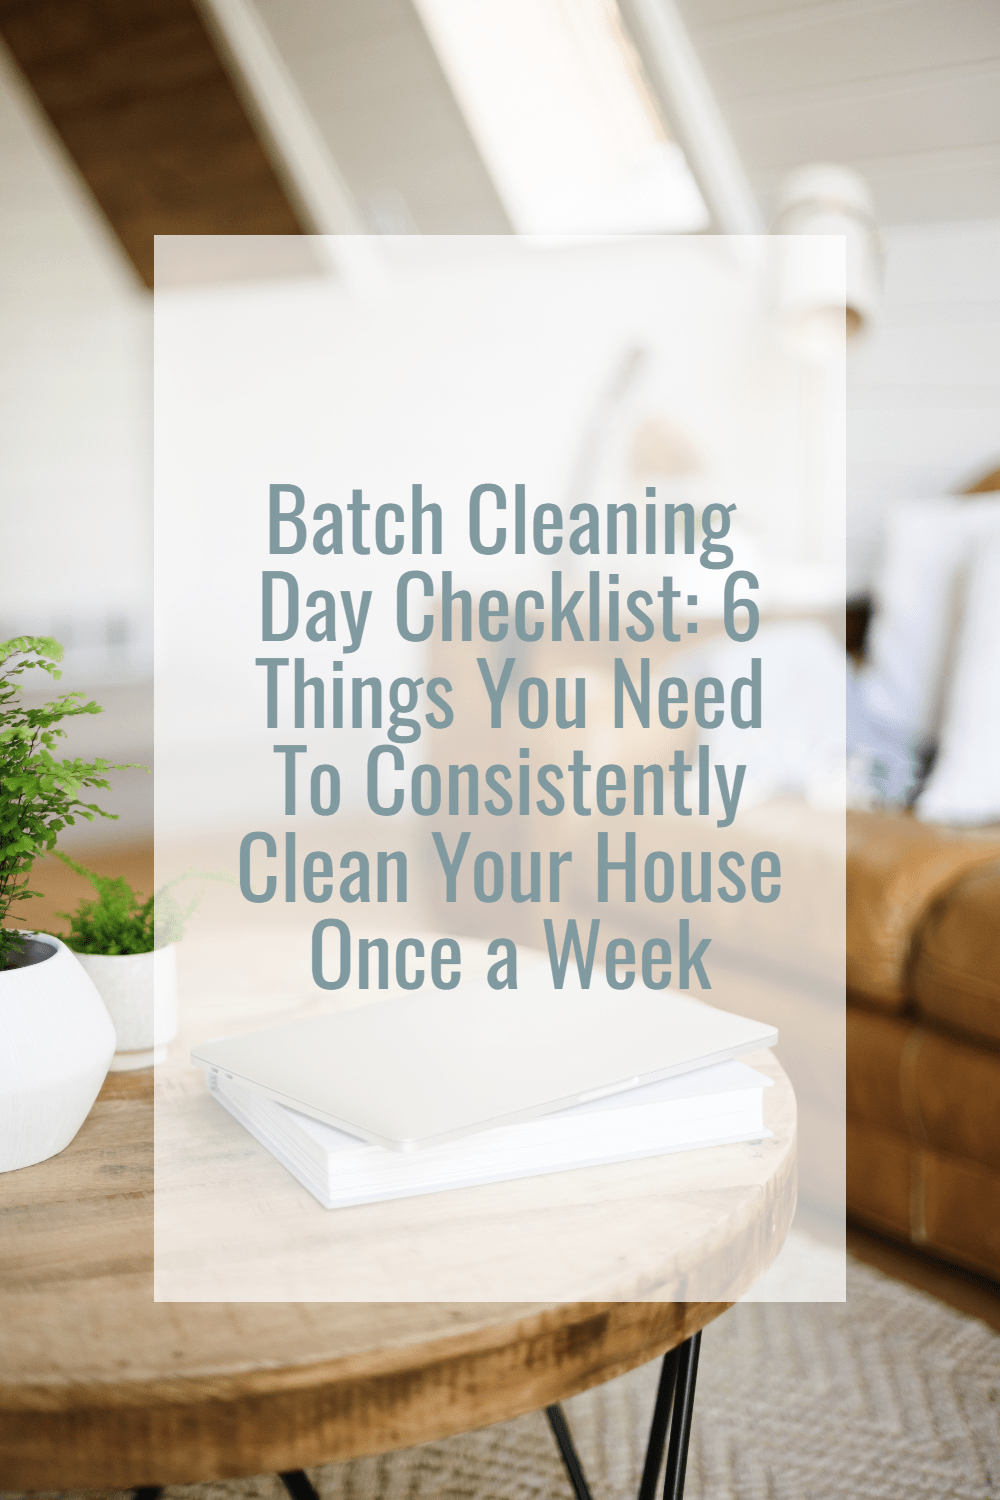 Batch Cleaning Day Checklist: How To Clean Your House Once a Week